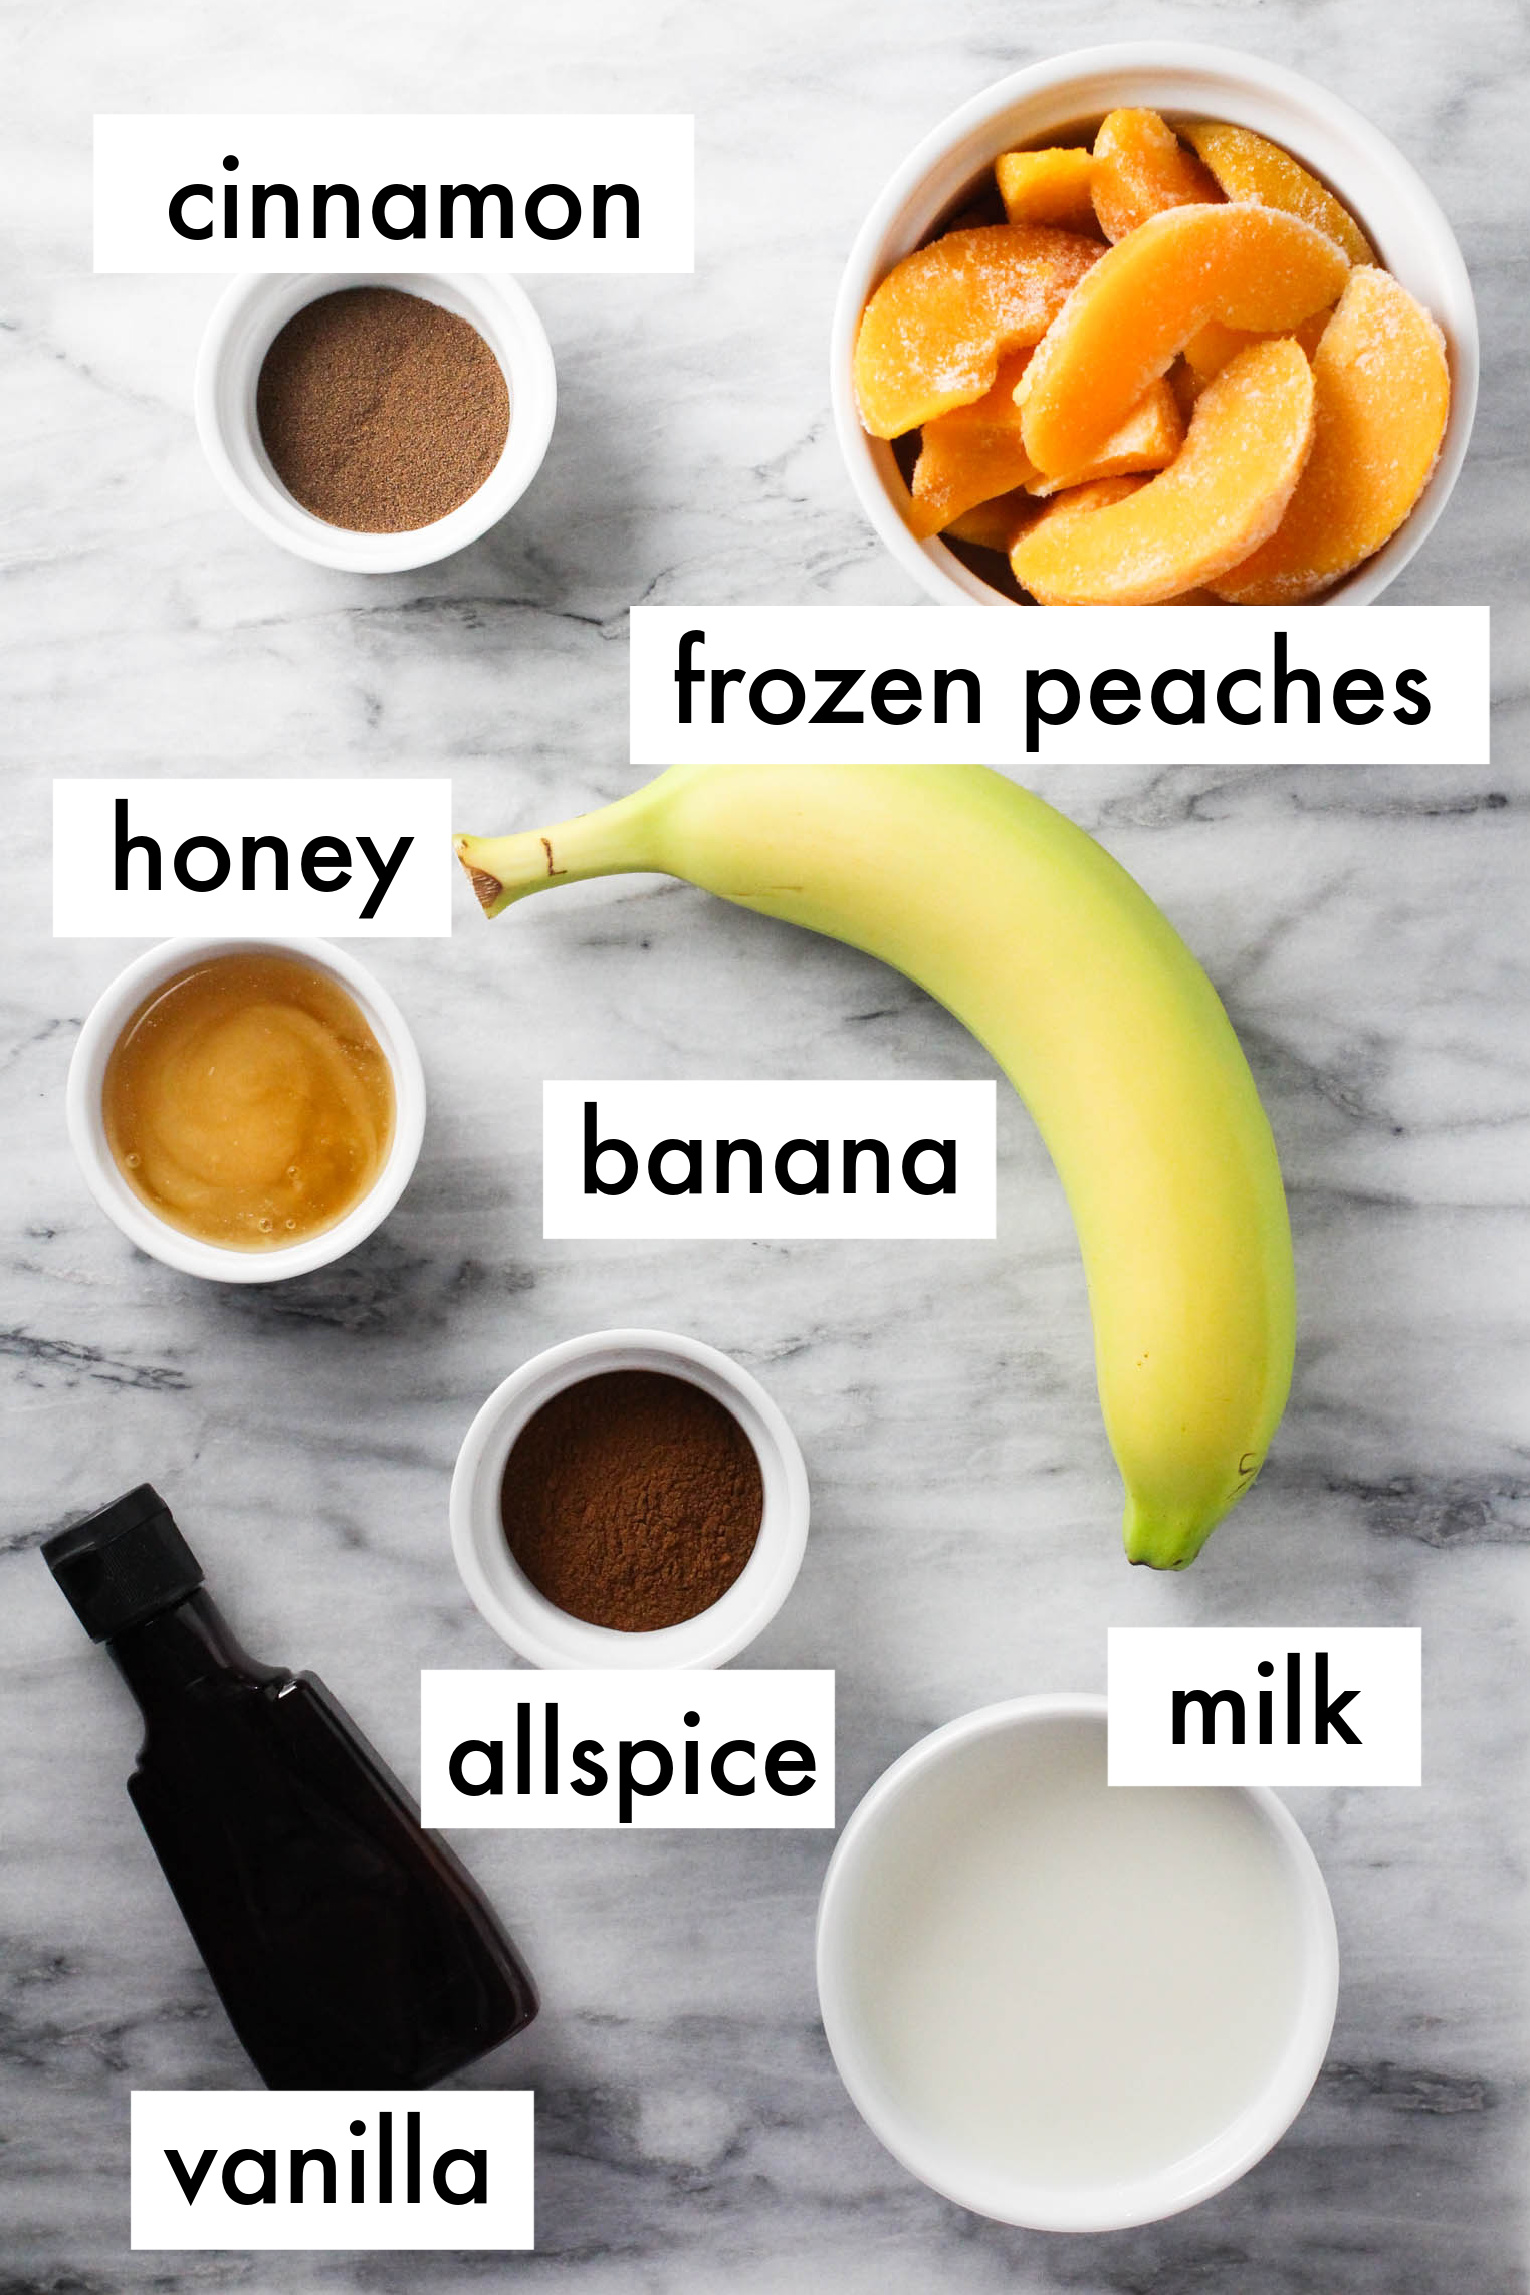 Peach banana smoothie ingredients displayed on marble background. The ingredients are labeled as follows: cinnamon, frozen peaches, honey, banana, allspice, milk, vanilla.